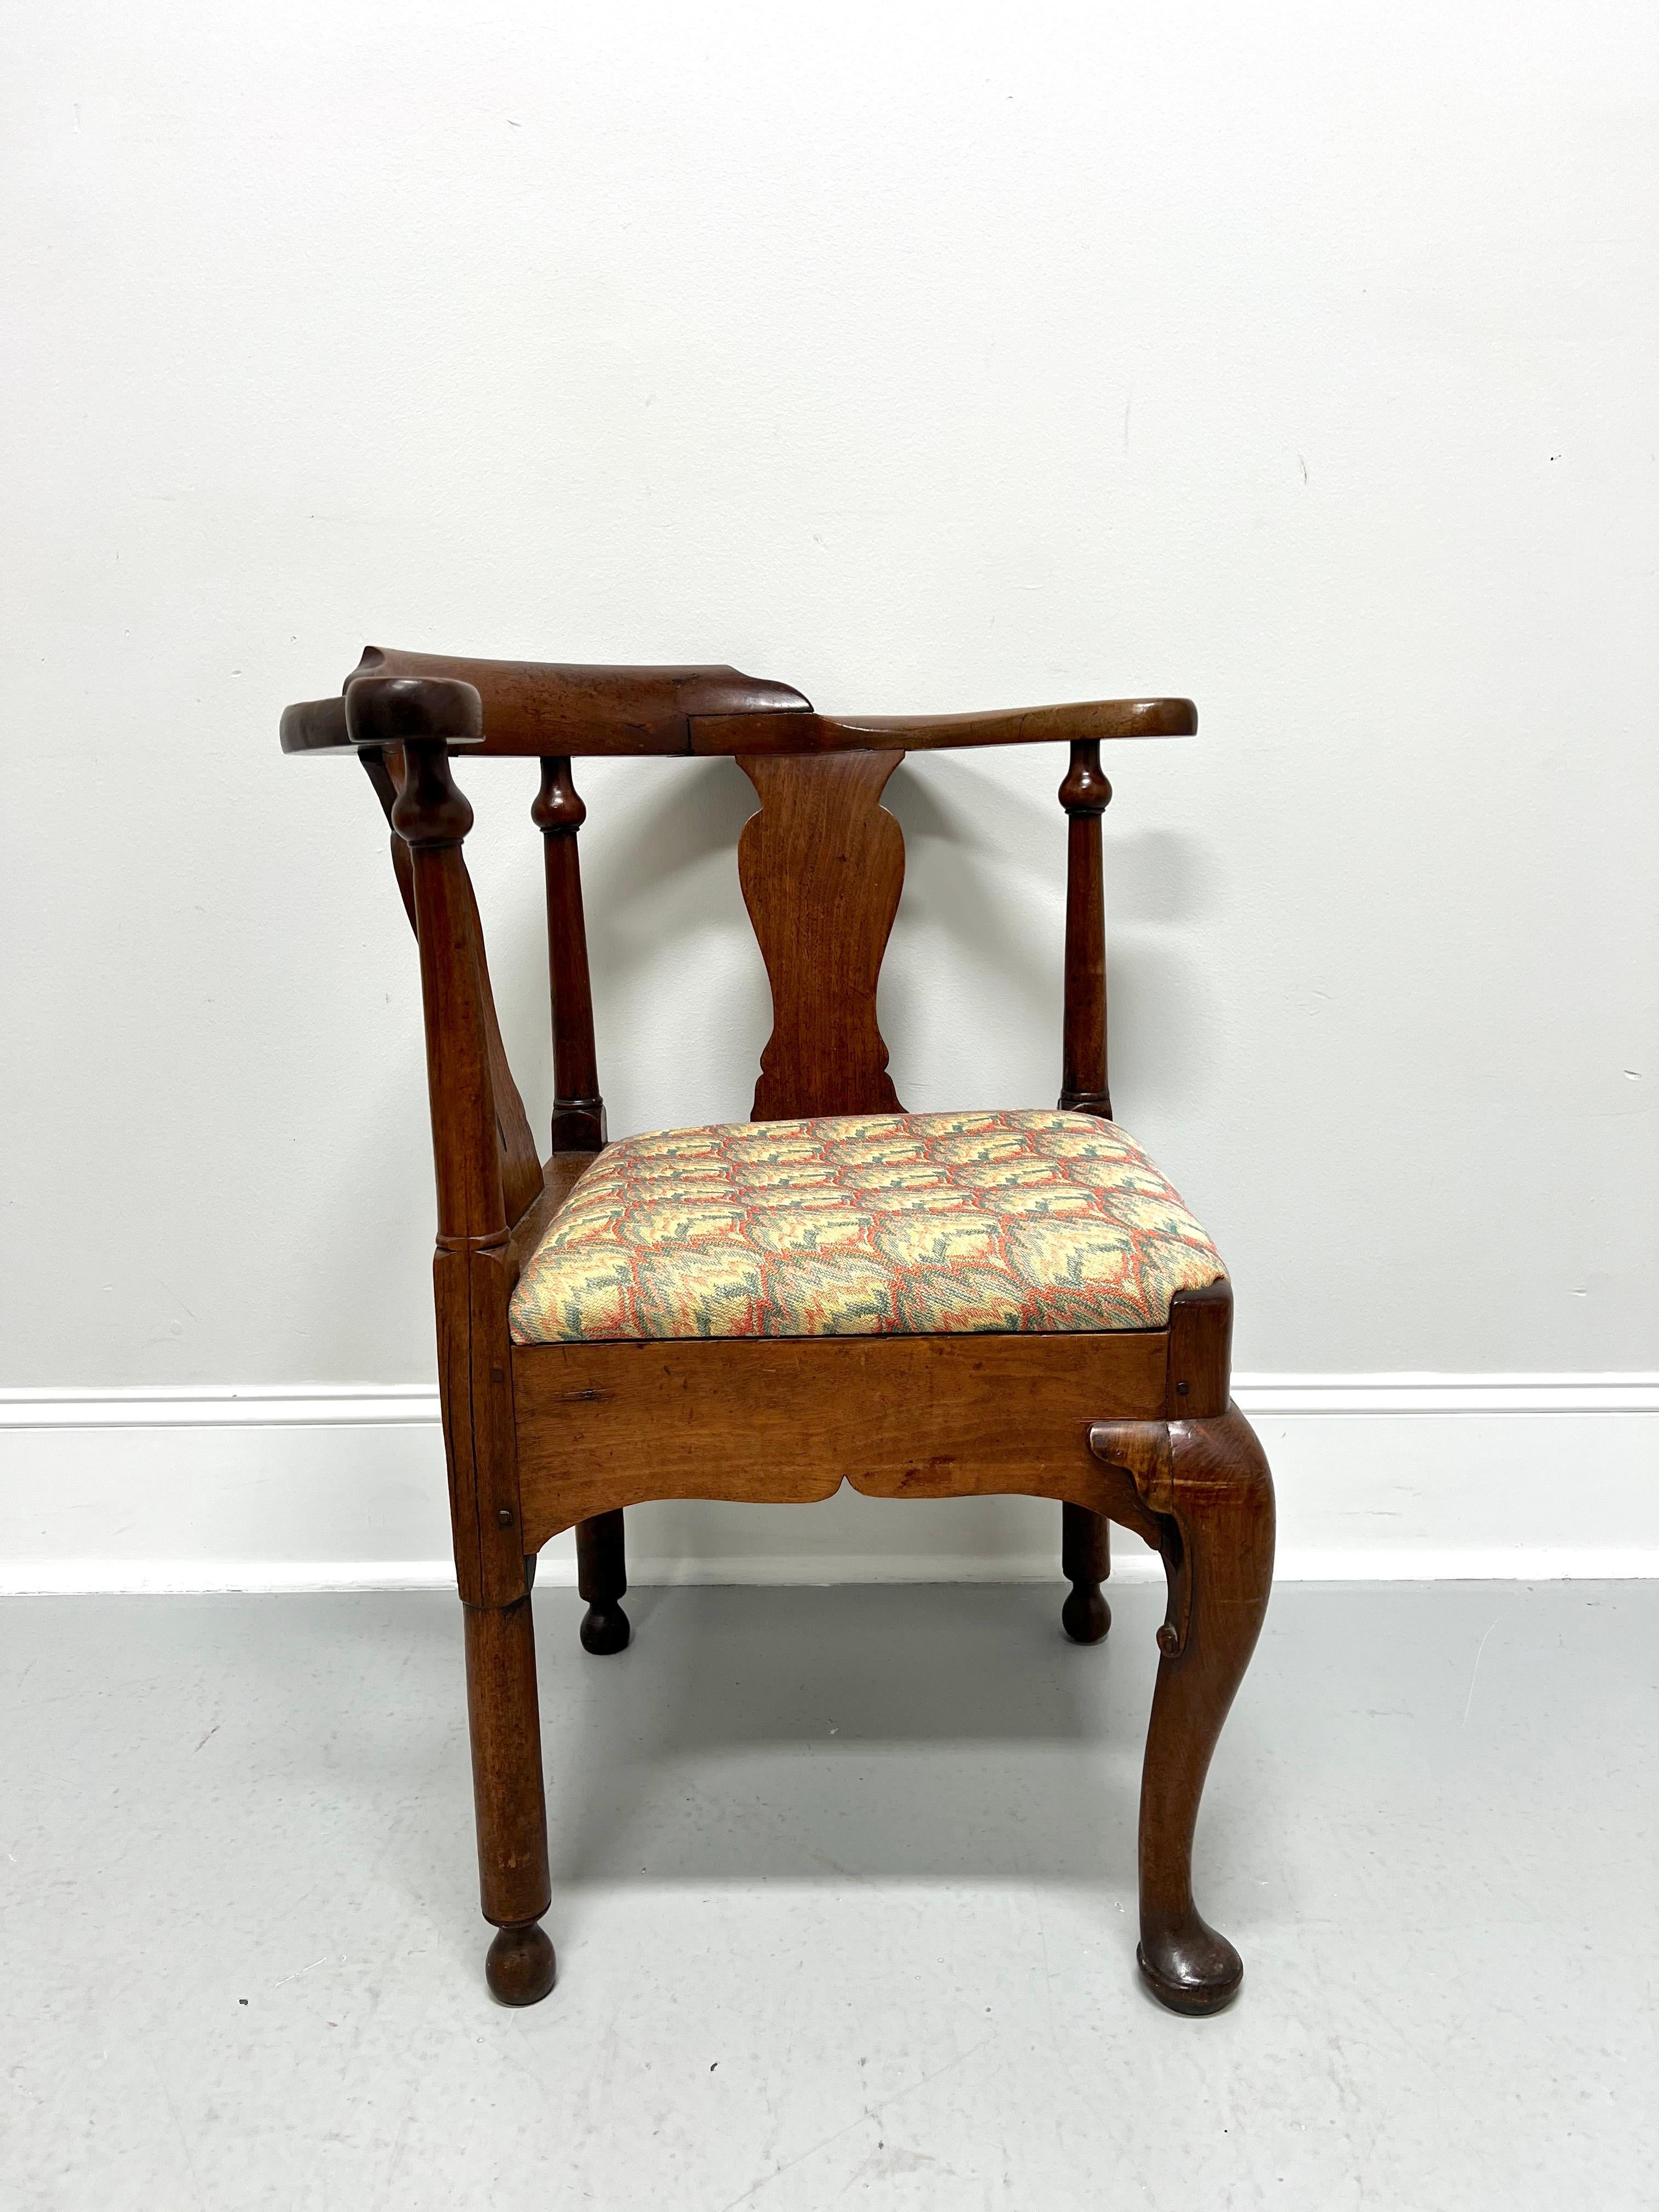 Antique 18th Century Circa 1750 American Colonial Walnut Corner Chair In Good Condition For Sale In Charlotte, NC